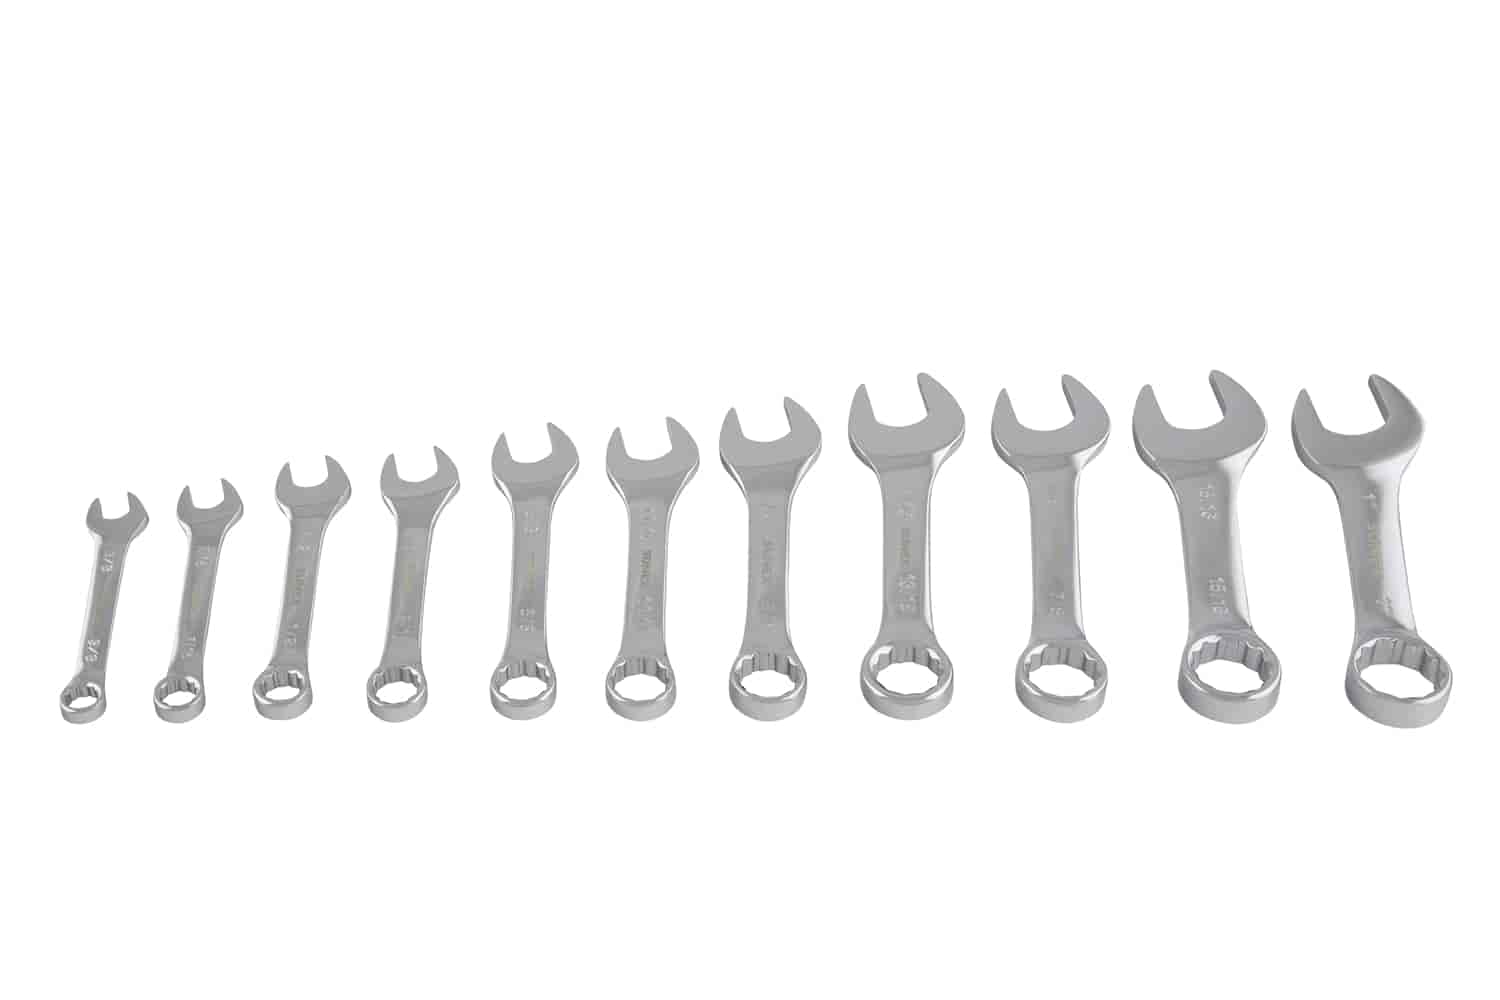 11 Pc. SAE Stubby Combination Wrench Set Compact design for maximum access in confined areas